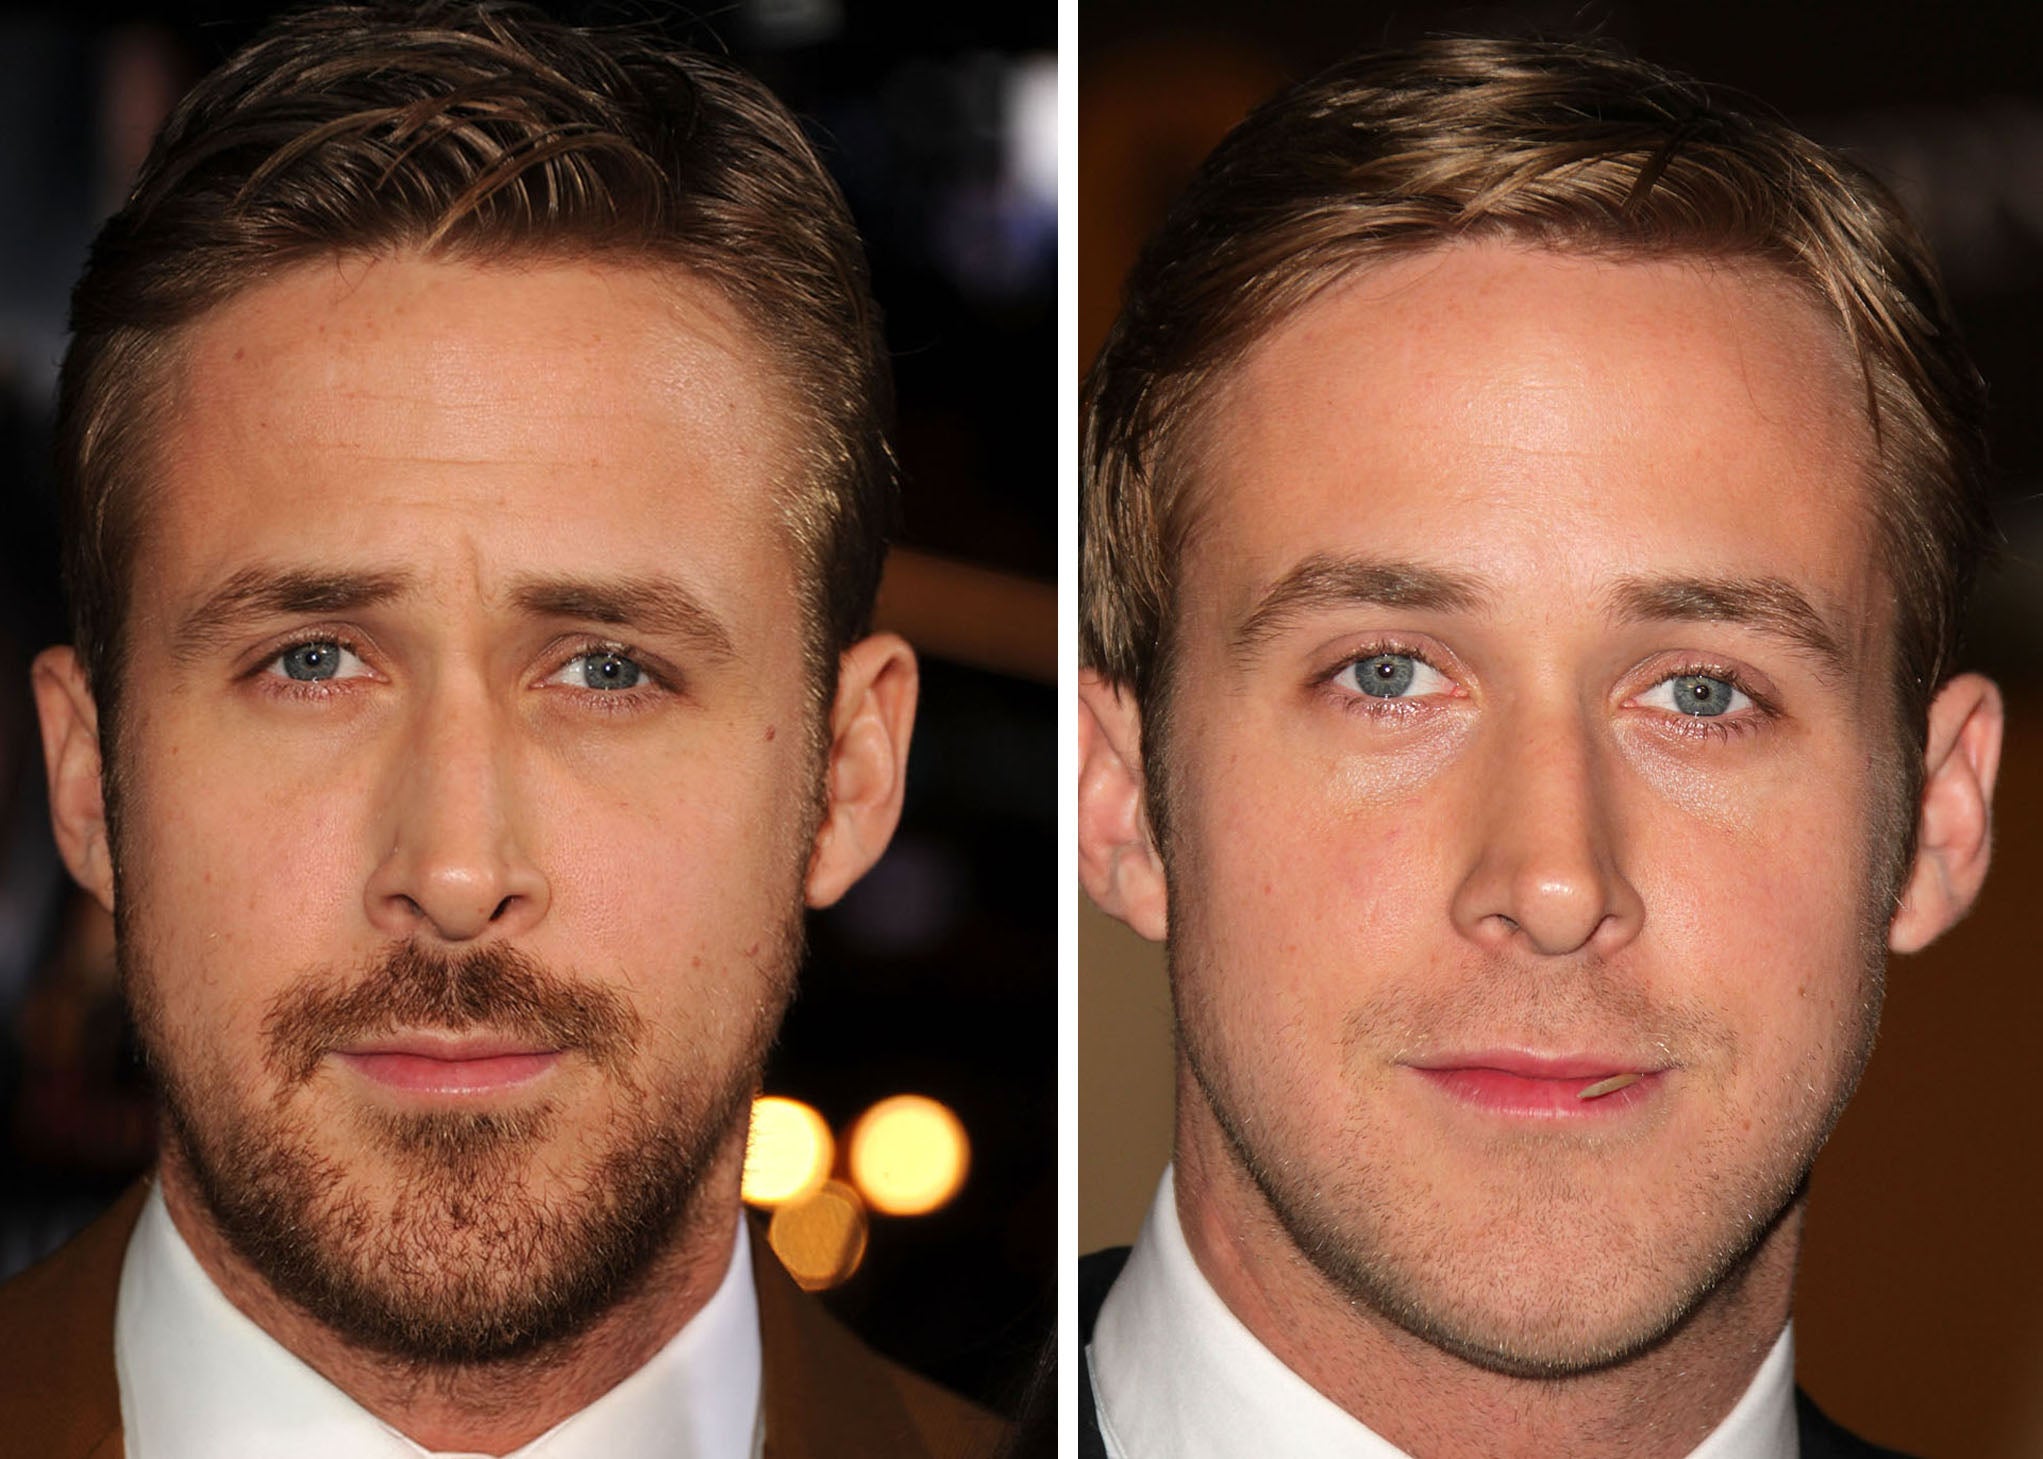 Are beards attractive? Ryan Gosling says yes, but science says no. Take the  A-list facial hair challenge and find out who's right | The Independent |  The Independent